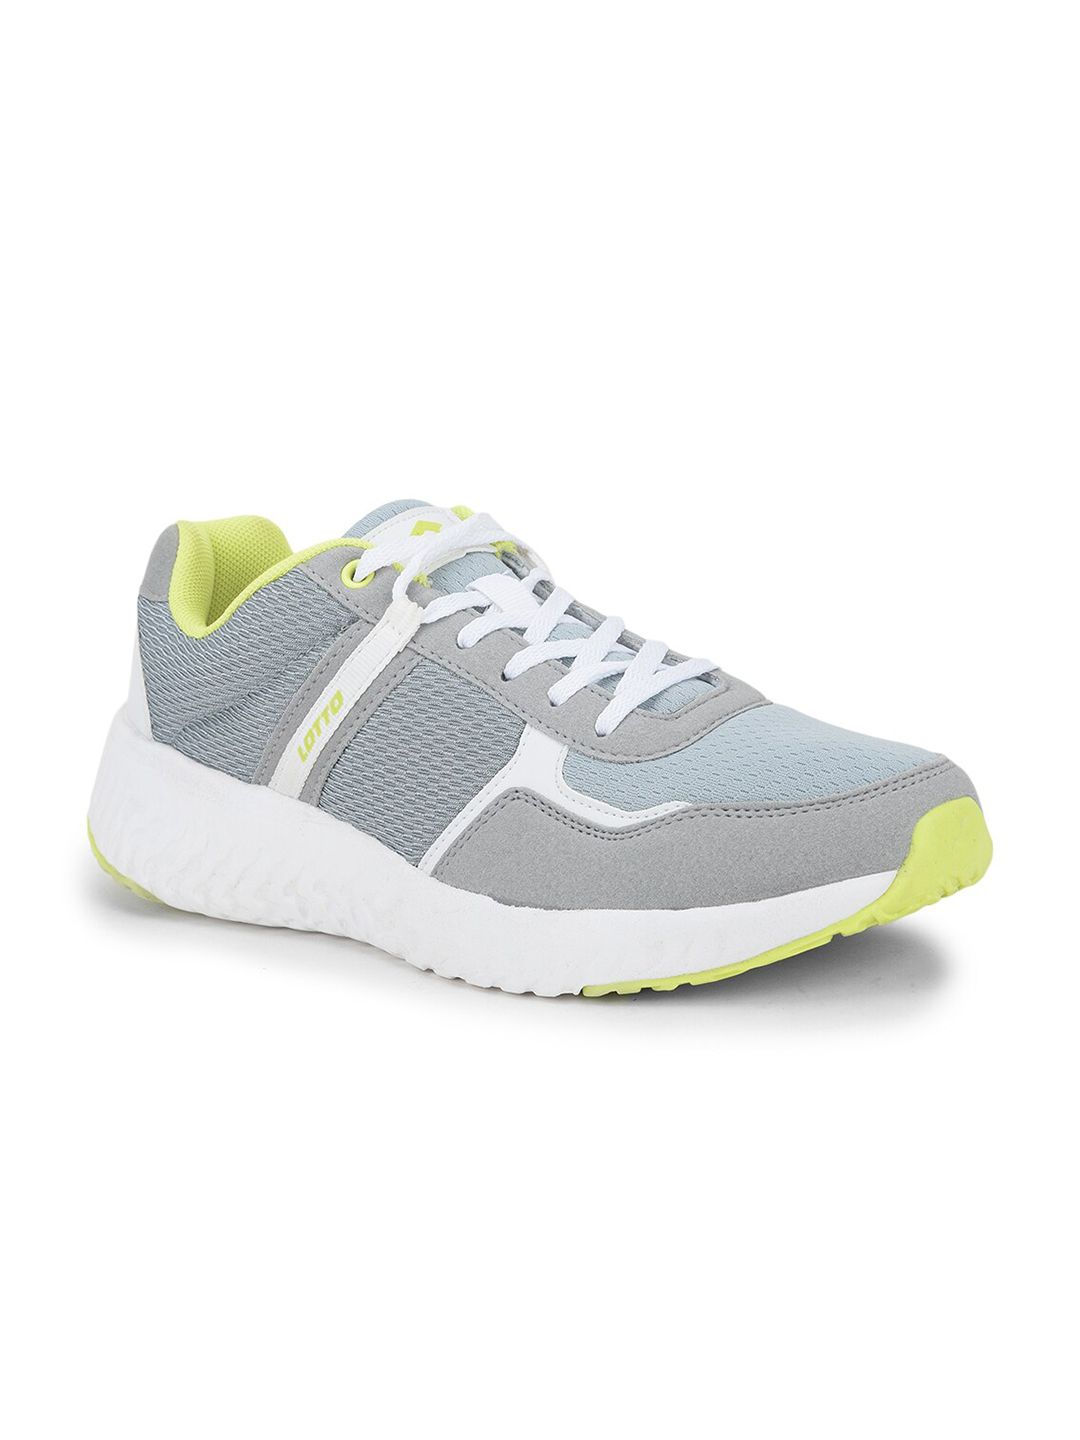 Lotto Women Grey Mesh Running Shoes Price in India